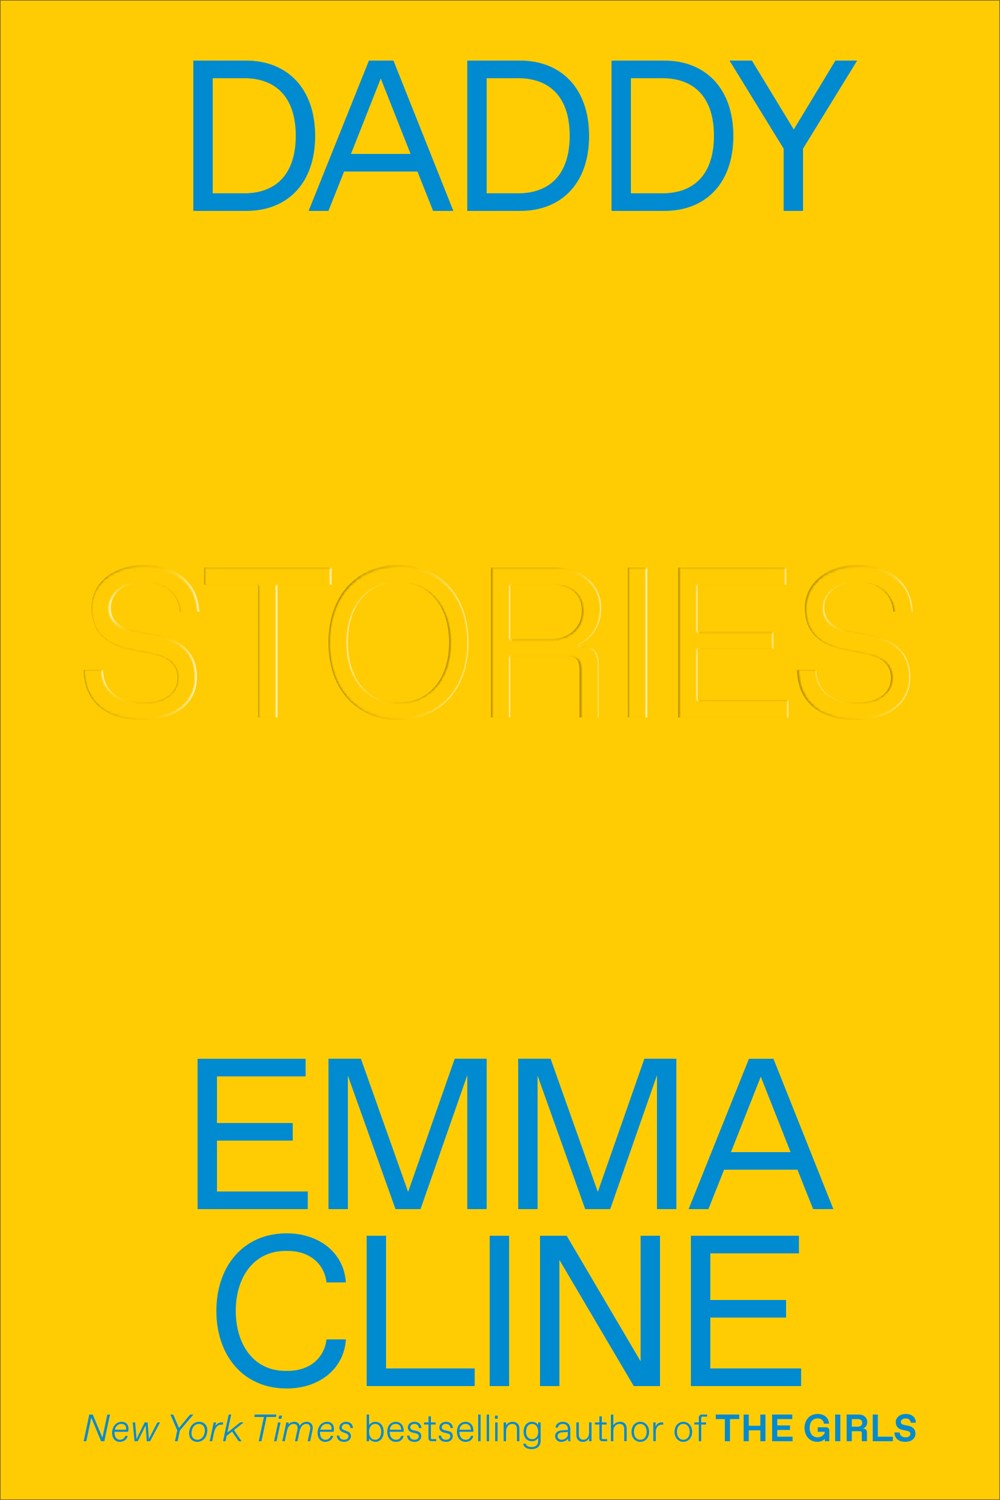 Daddy: Stories by Emma Cline